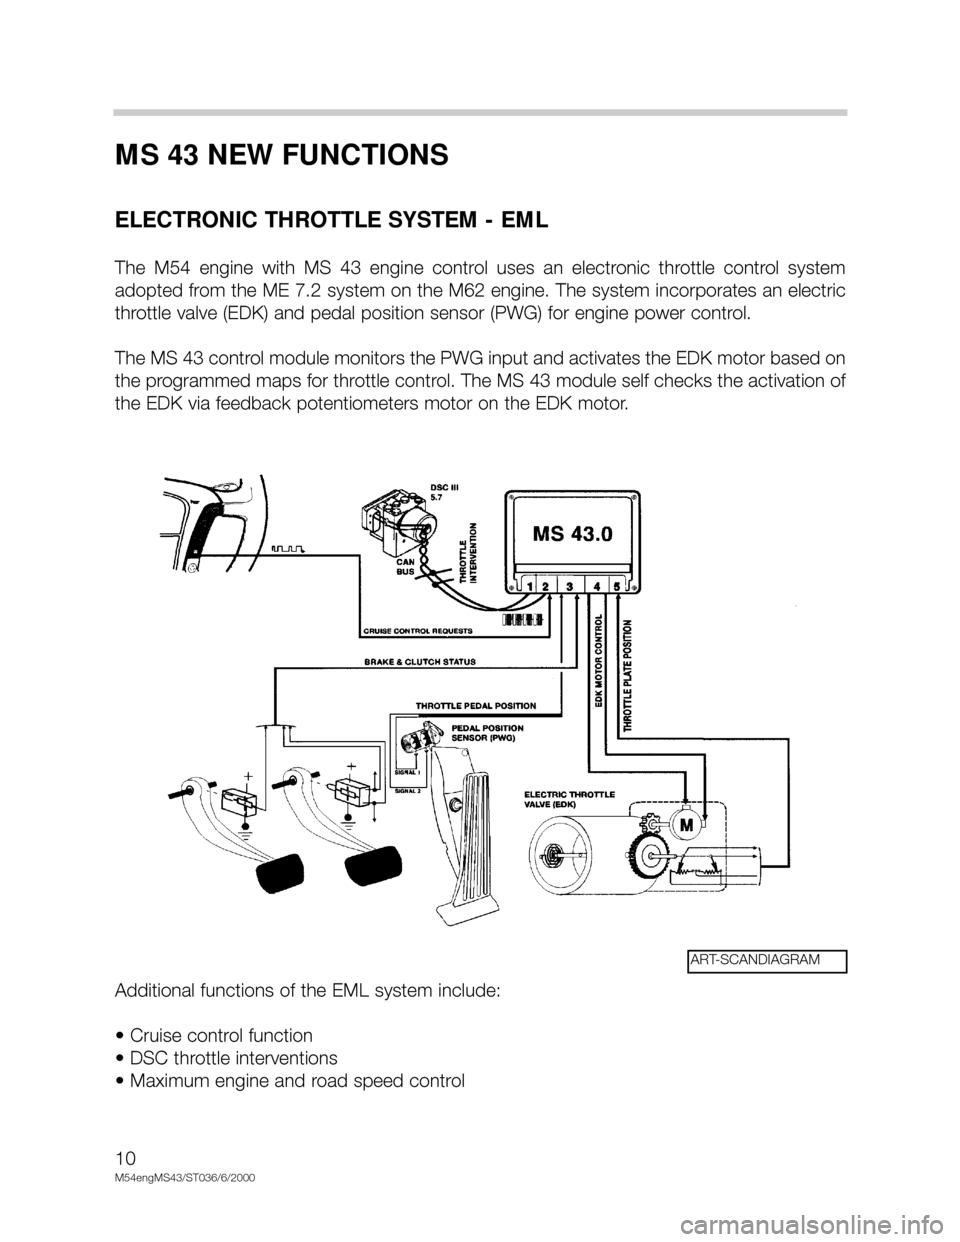 BMW X5 1999 E53 M54 Engine Workshop Manual 10
M54engMS43/ST036/6/2000
MS 43 NEW FUNCTIONS
ELECTRONIC THROTTLE SYSTEM - EML
The  M54  engine  with  MS  43  engine  control  uses  an  electronic  throttle  control  system
adopted from the ME 7.2